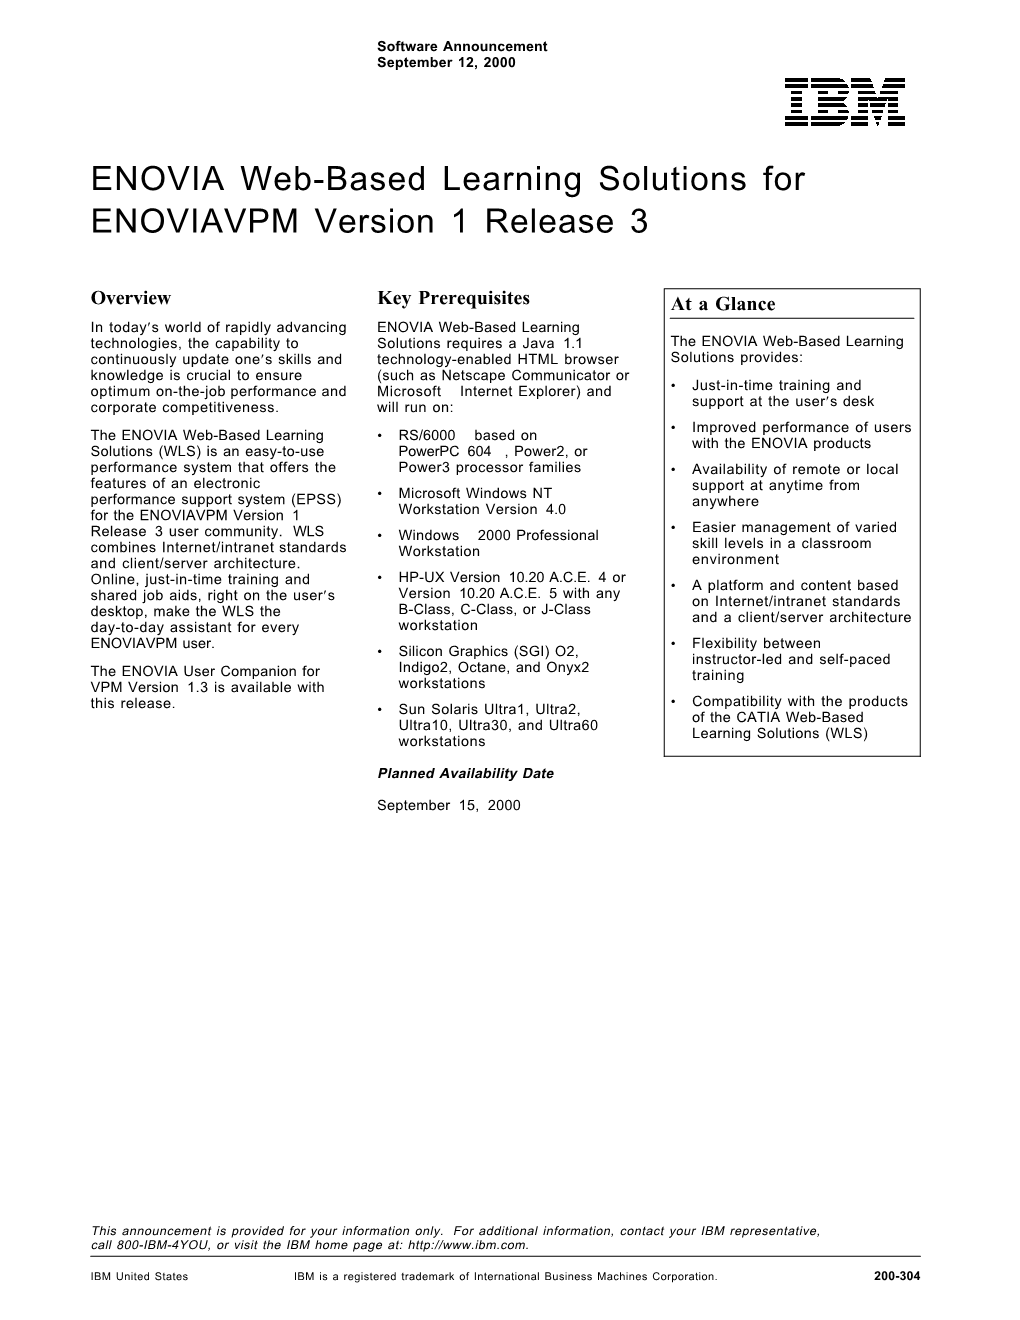 ENOVIA Web-Based Learning Solutions for ENOVIAVPM Version 1 Release 3